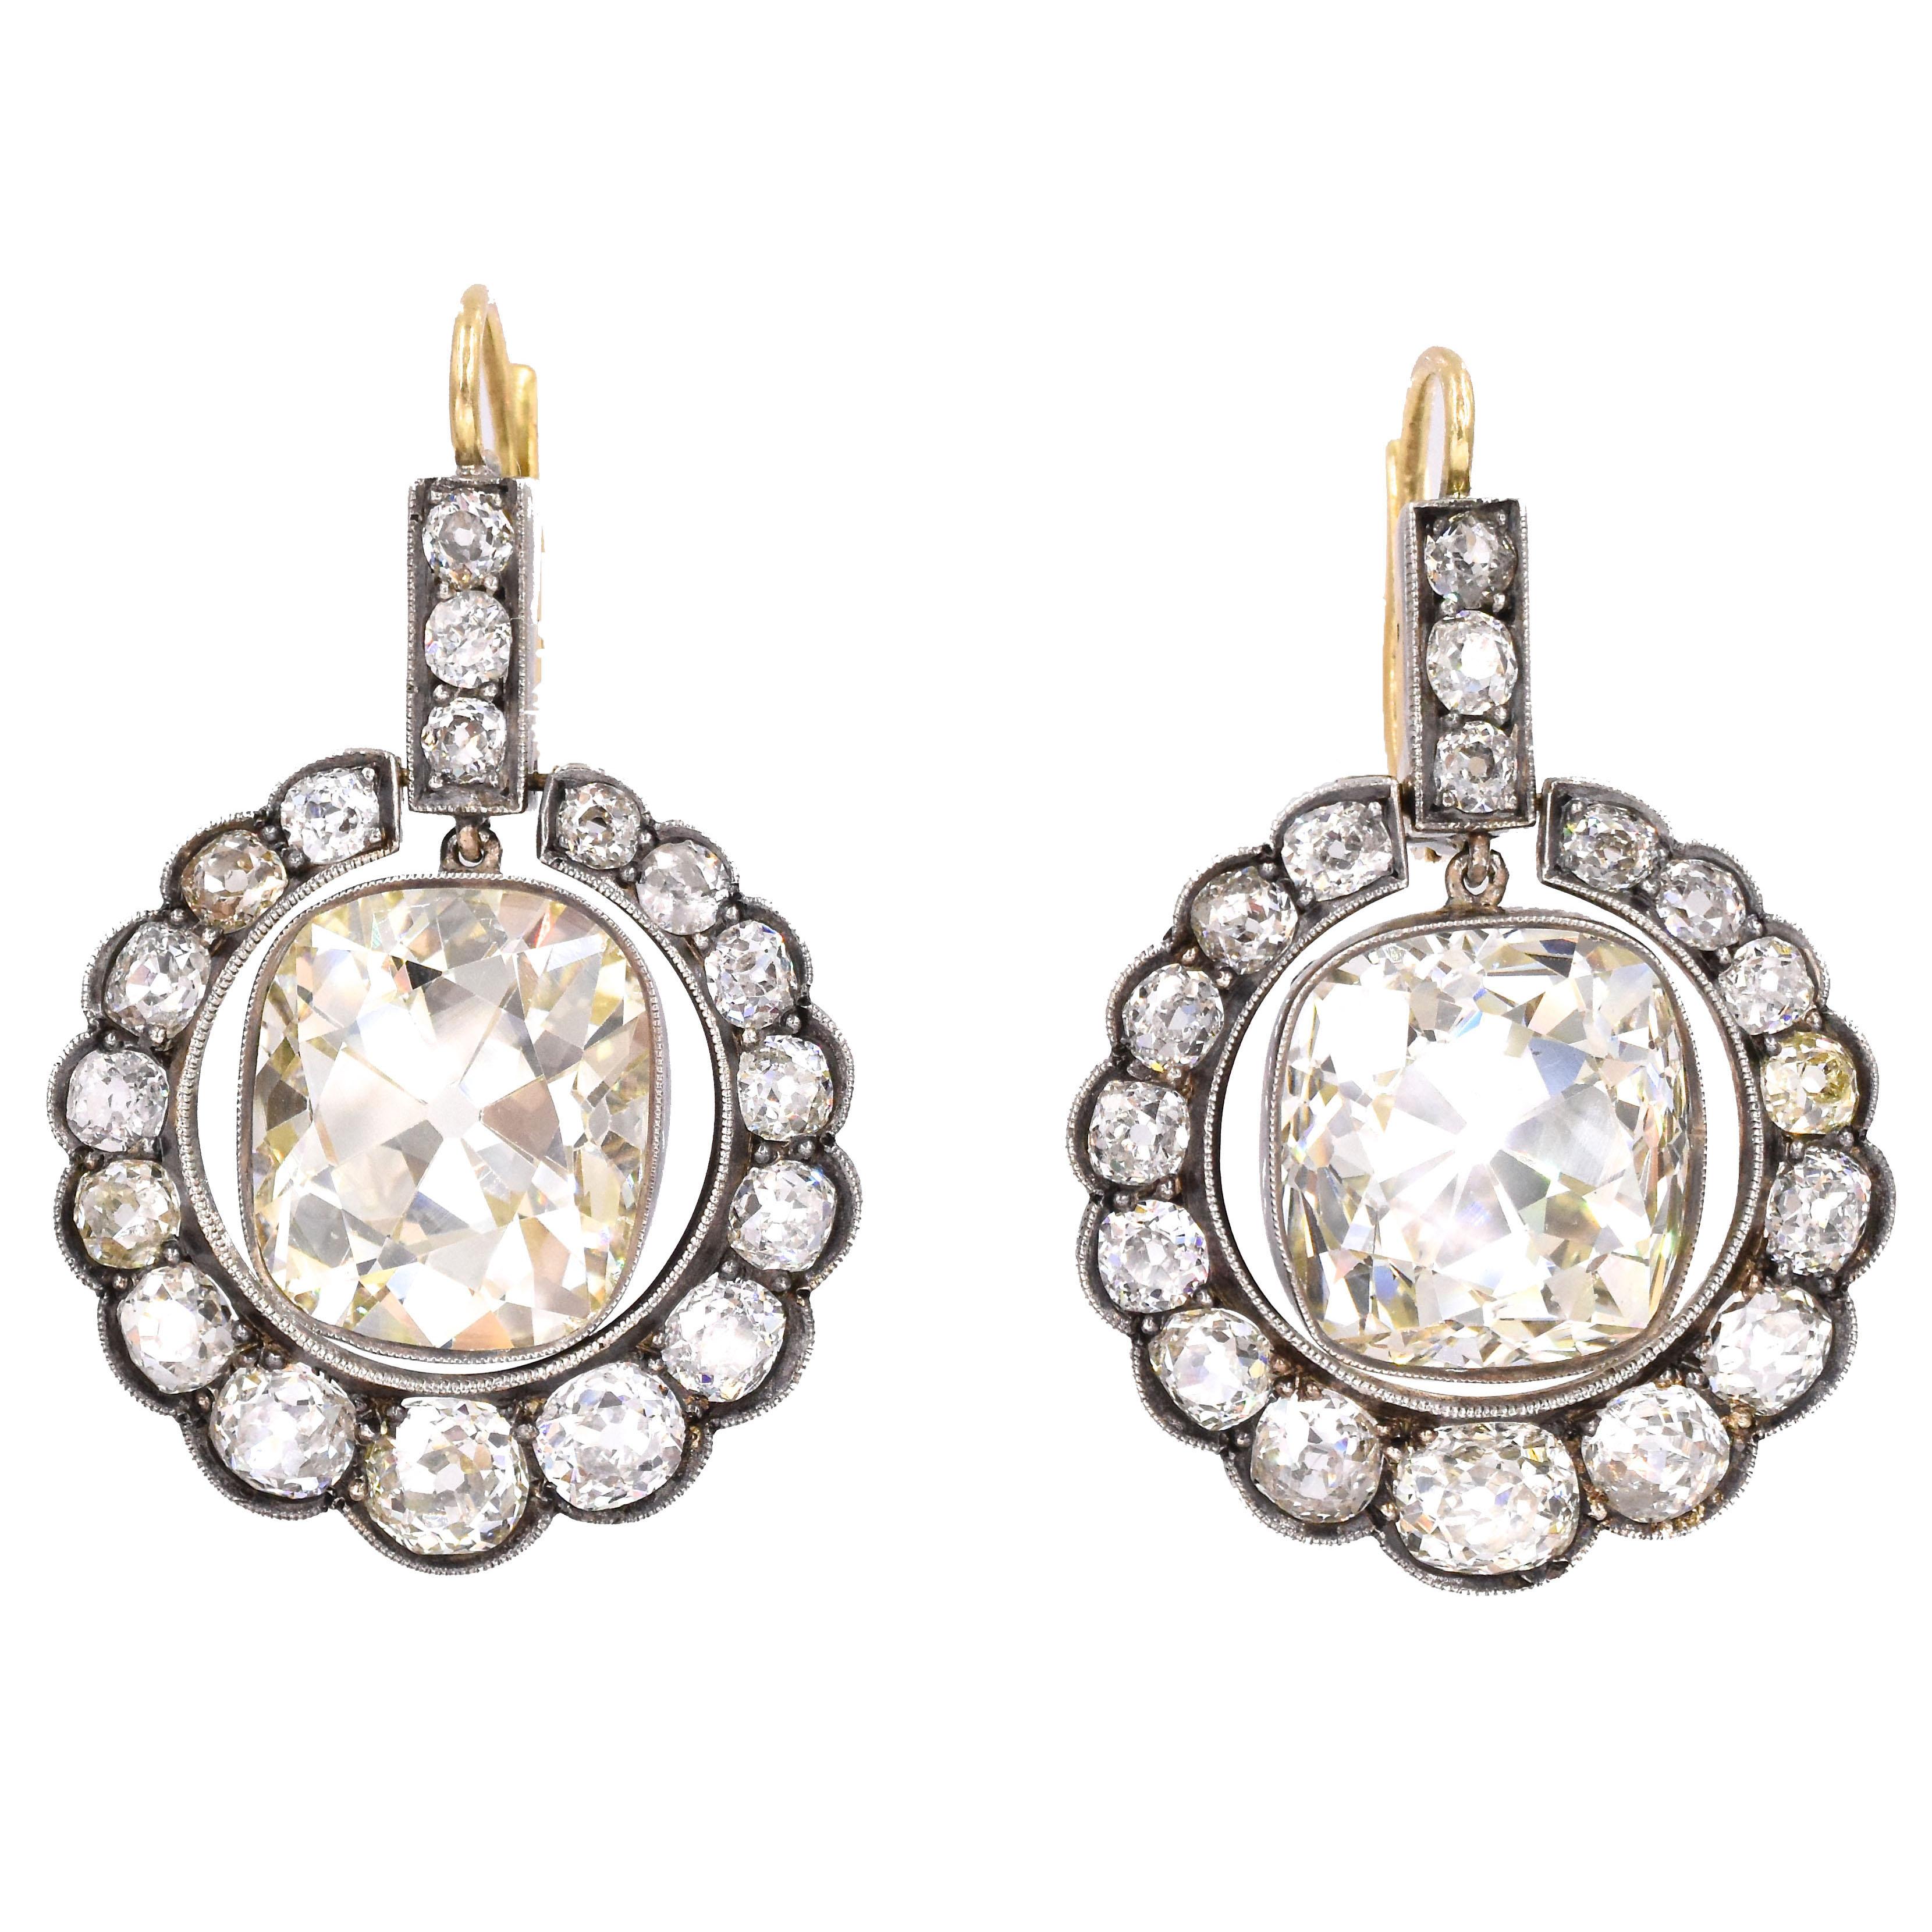 Stunning Victorian drop earrings!
36 gradual old European diamonds set in gold & silver  in a circular shape & filigree workmanship, with estimated total weight of 8 carats
Center diamonds are:
Shape:  Old Cushion Shape 
Weight: 12.88 carat  & 